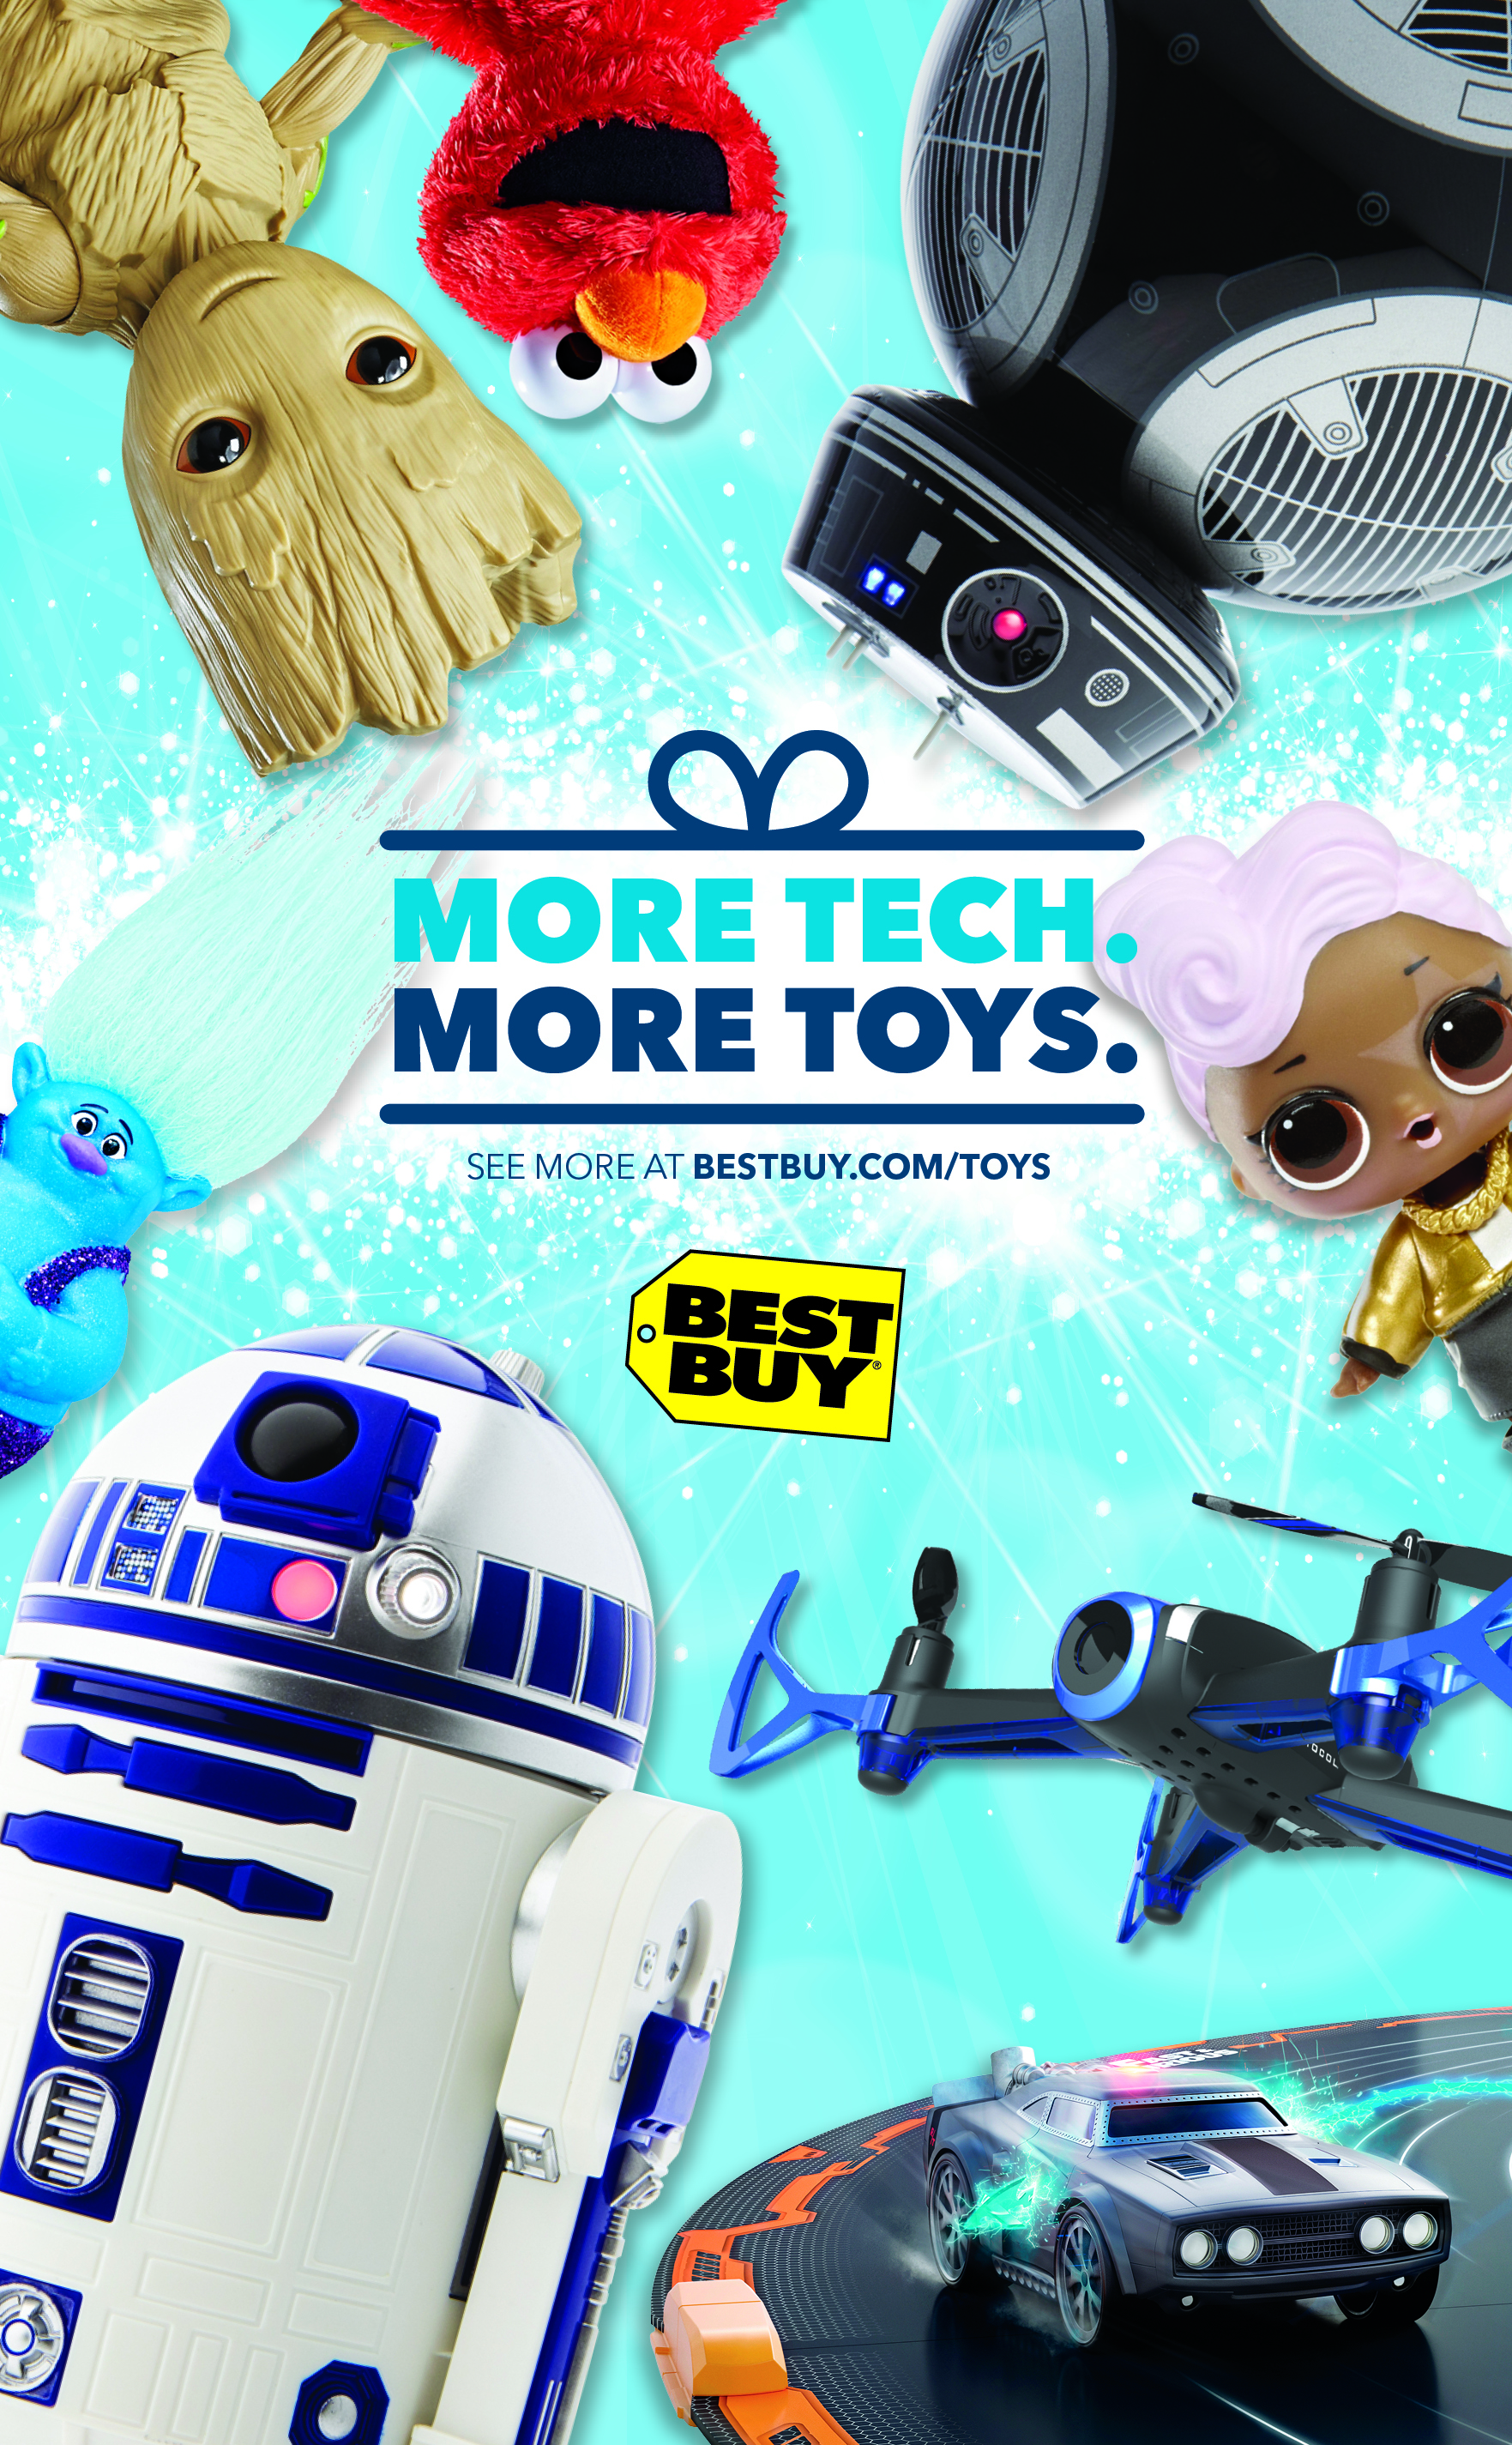 Top Gifts From the Best Buy Holiday Toy Catalog